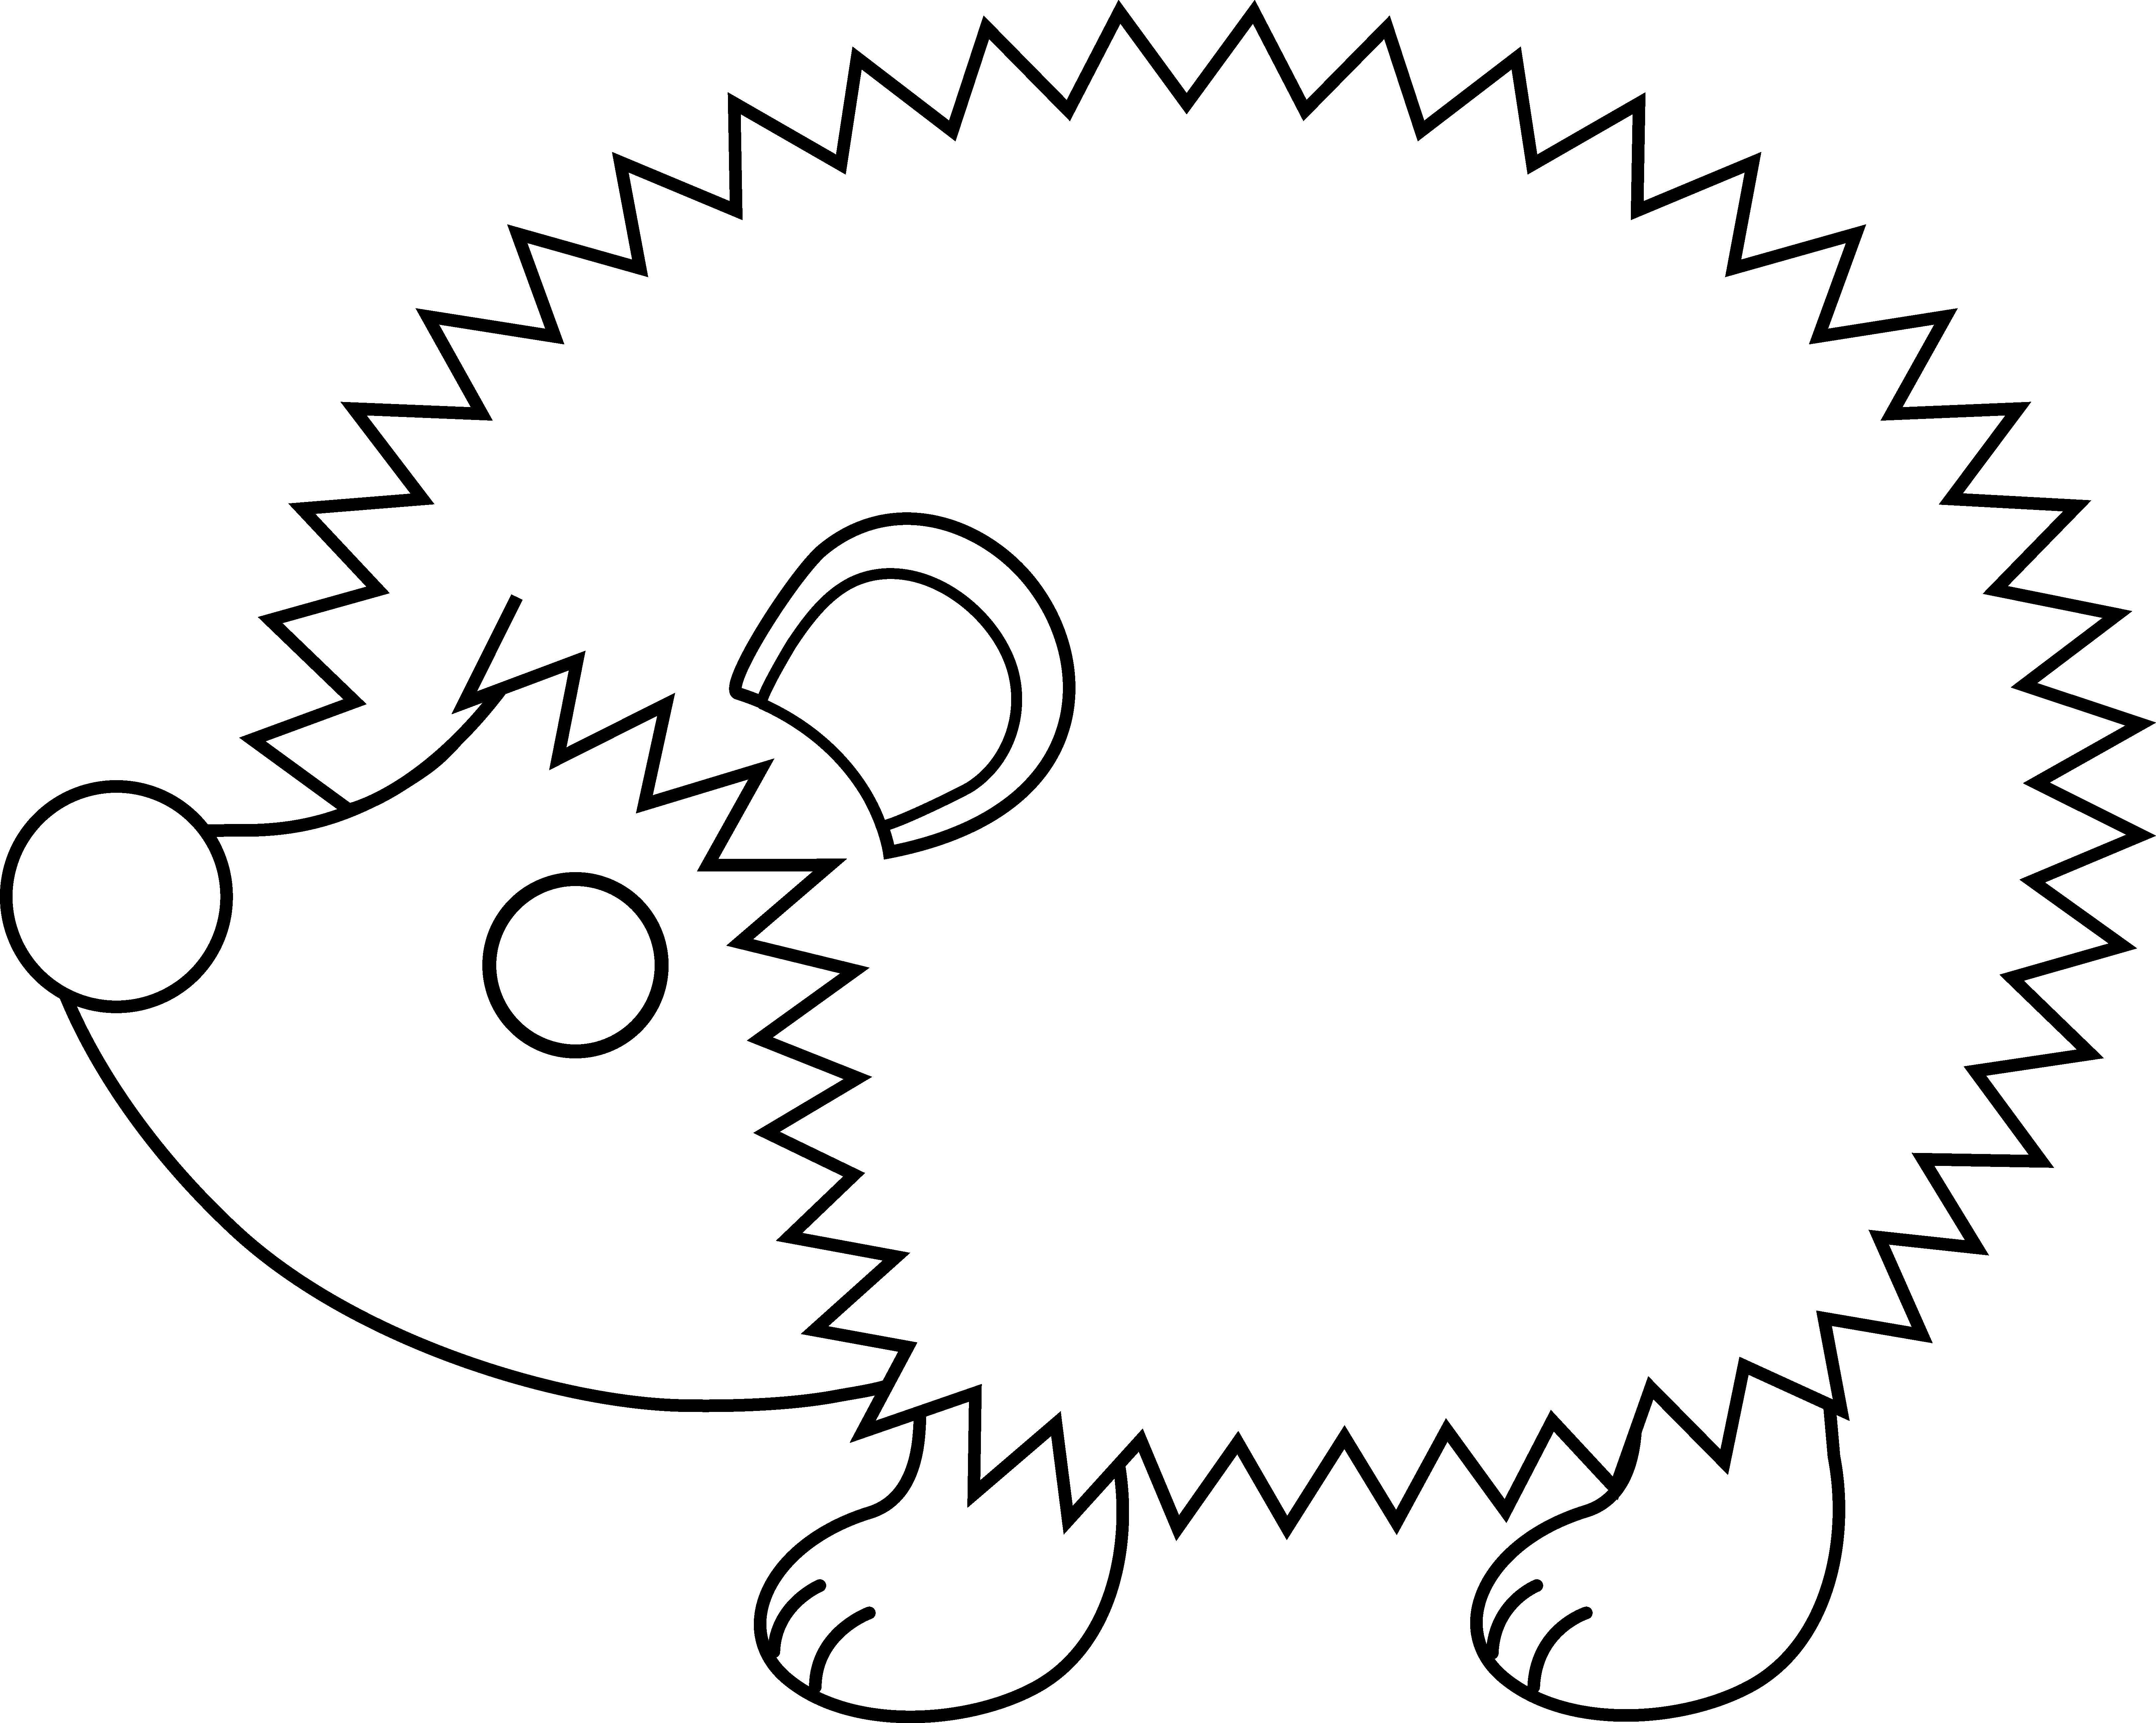 Free Hedgehog Outline Cliparts, Download Free Clip Art, Free